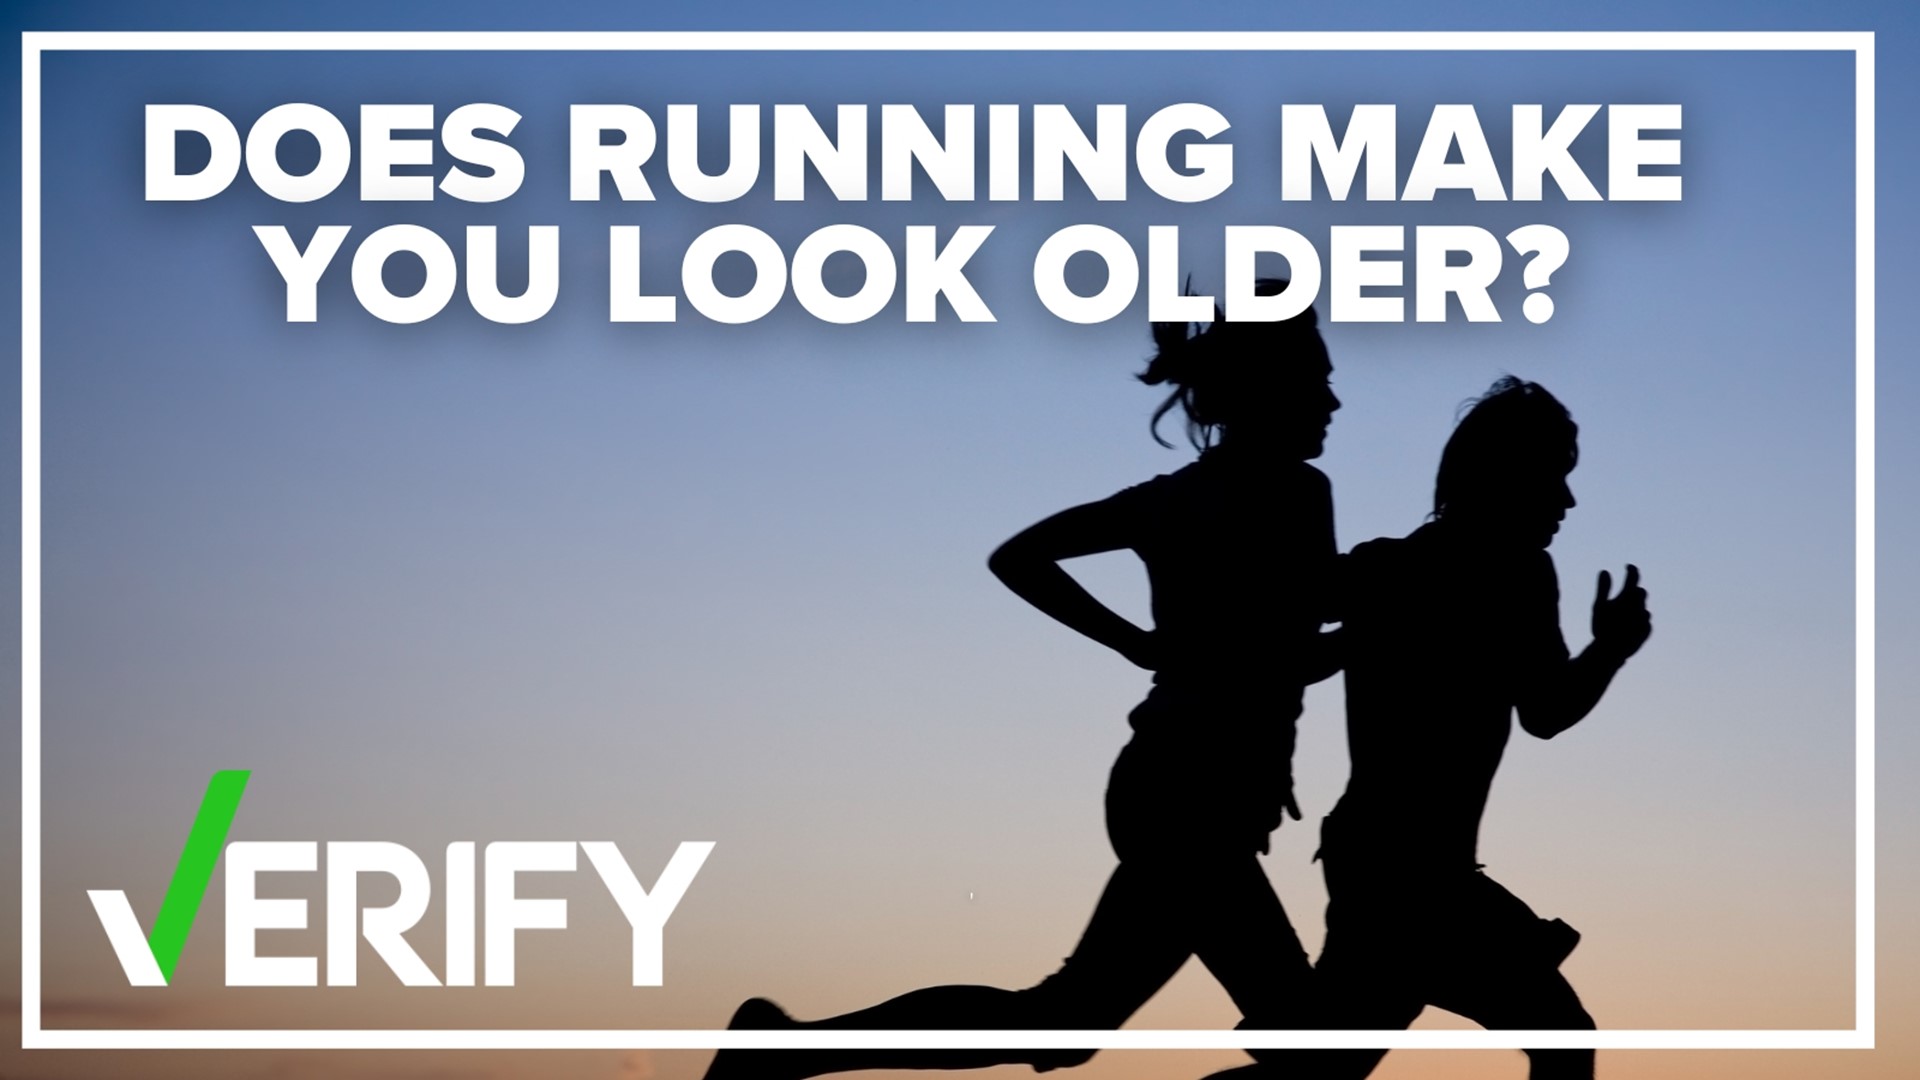 We verify the impacts exercising has on your face.